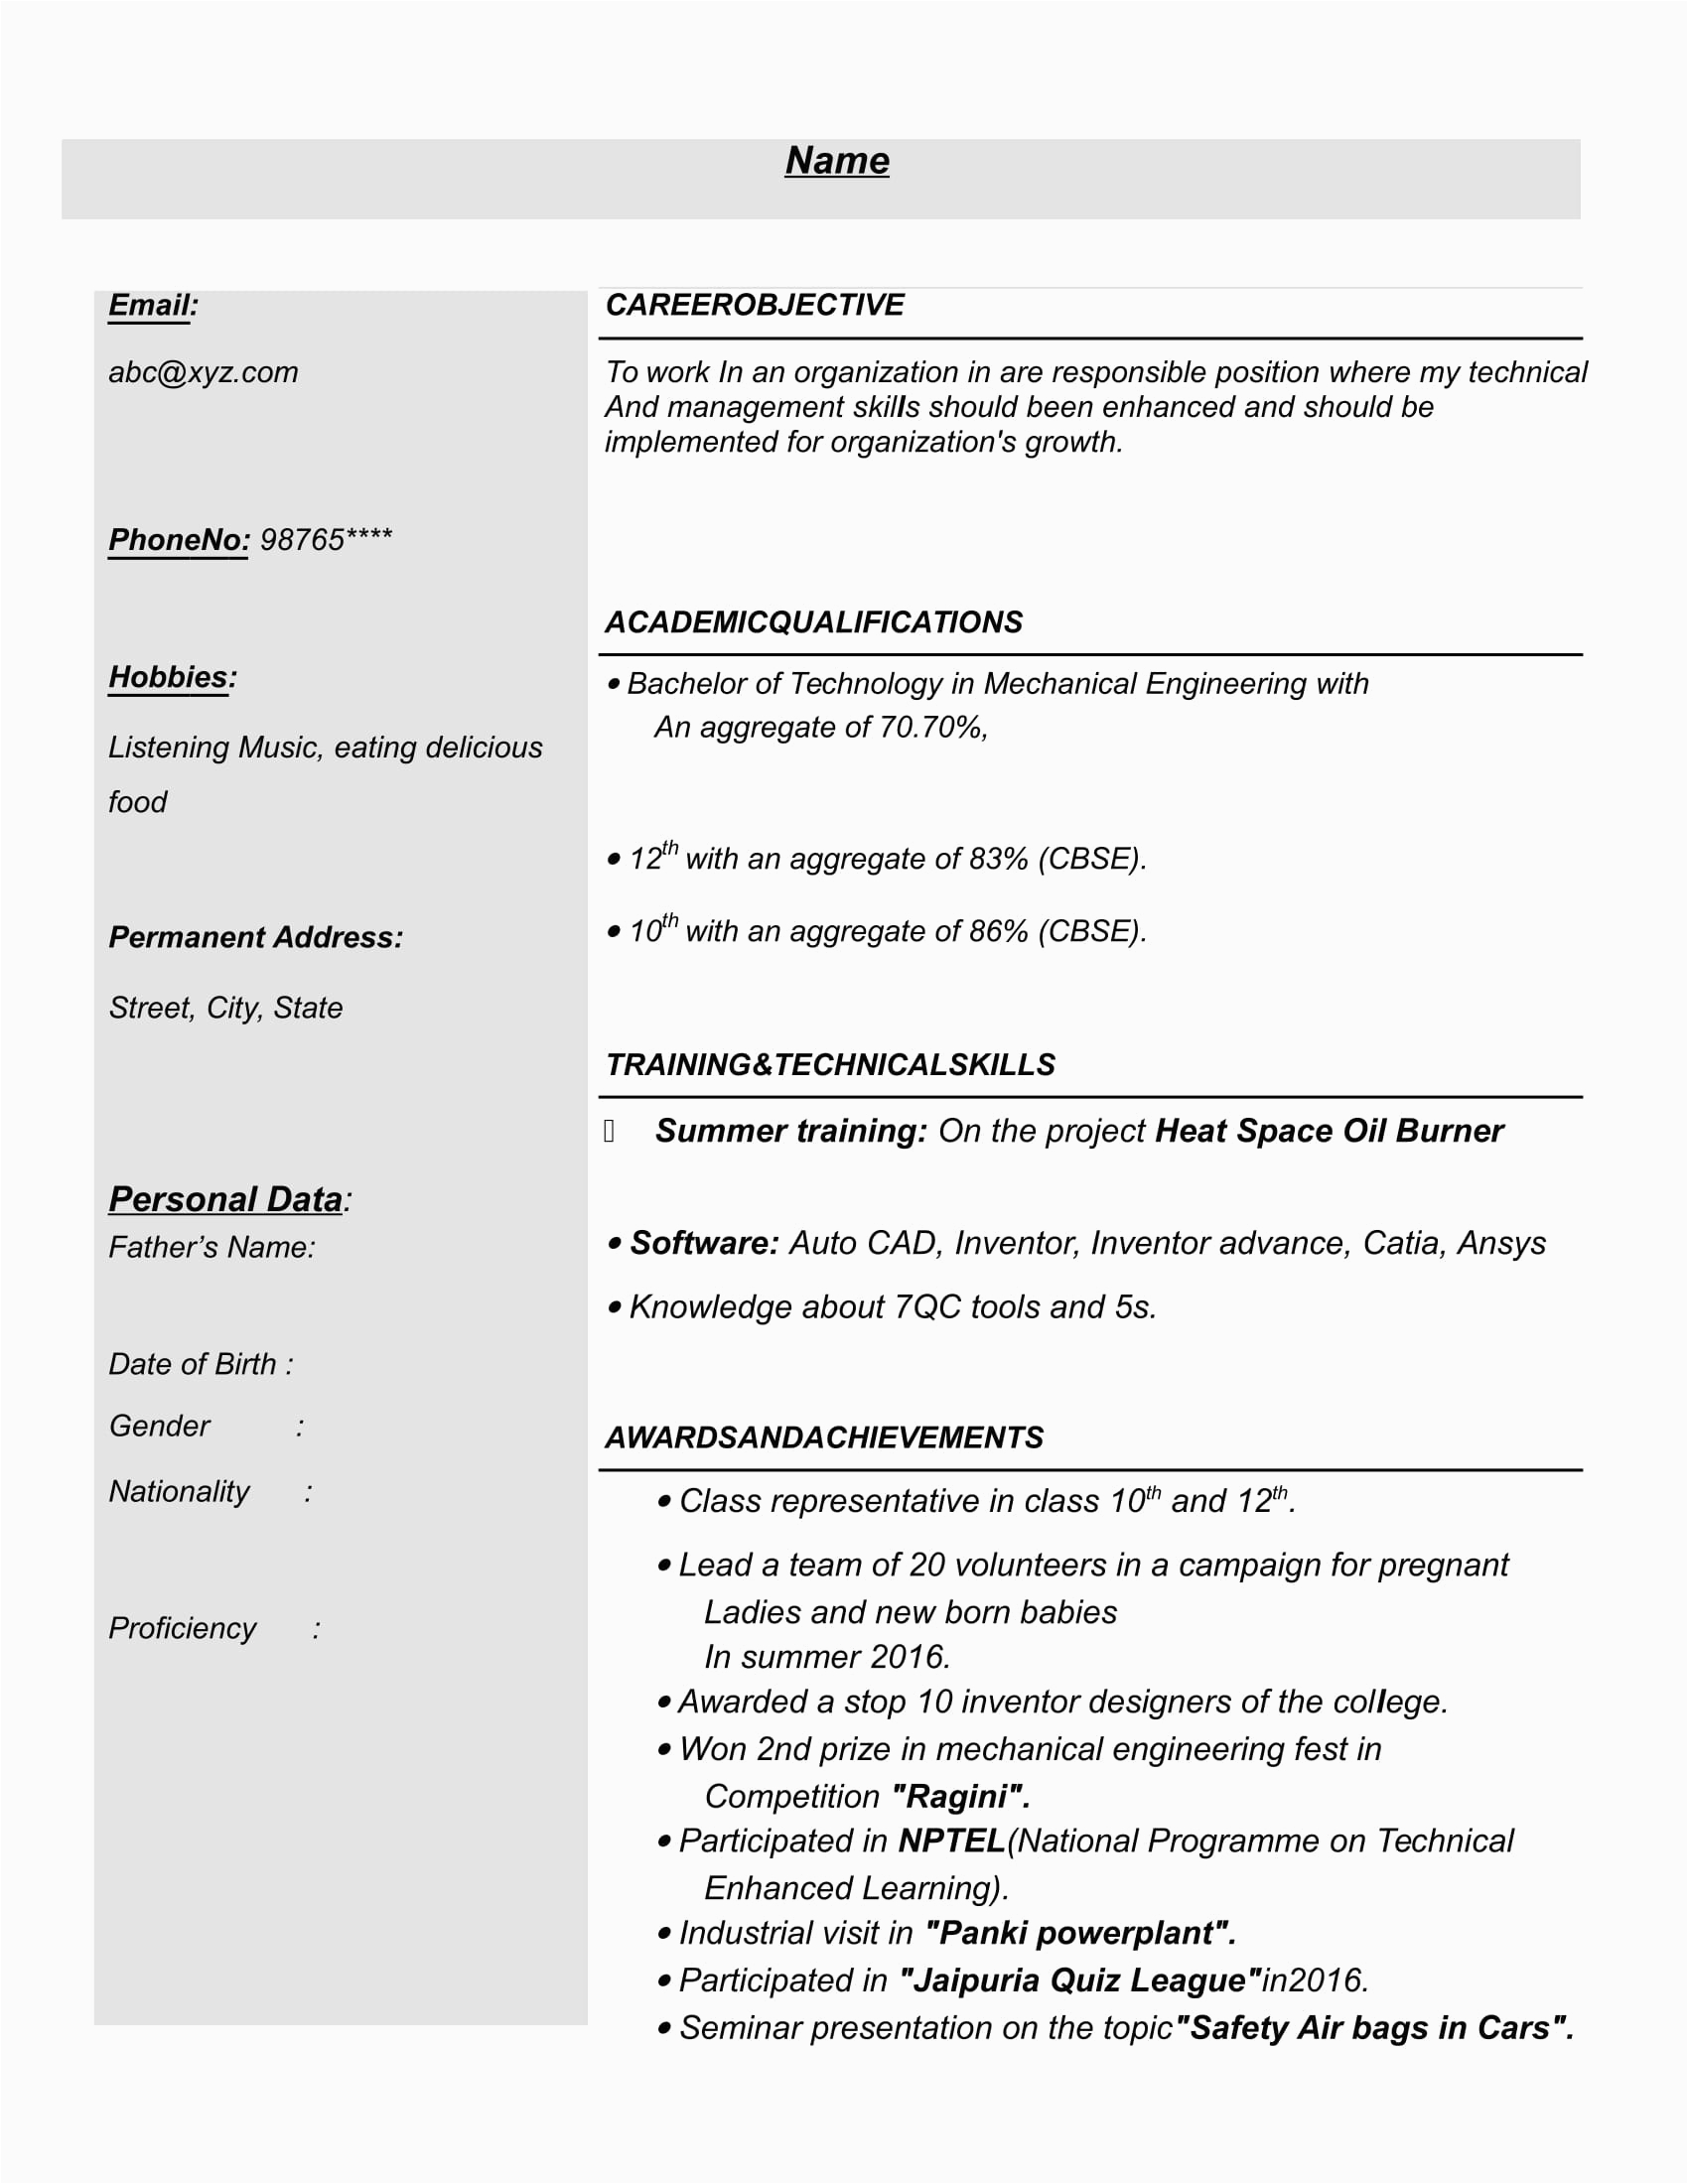 Resume Template for Mechanical Engineer Fresher Resume Templates for Mechanical Engineer Freshers